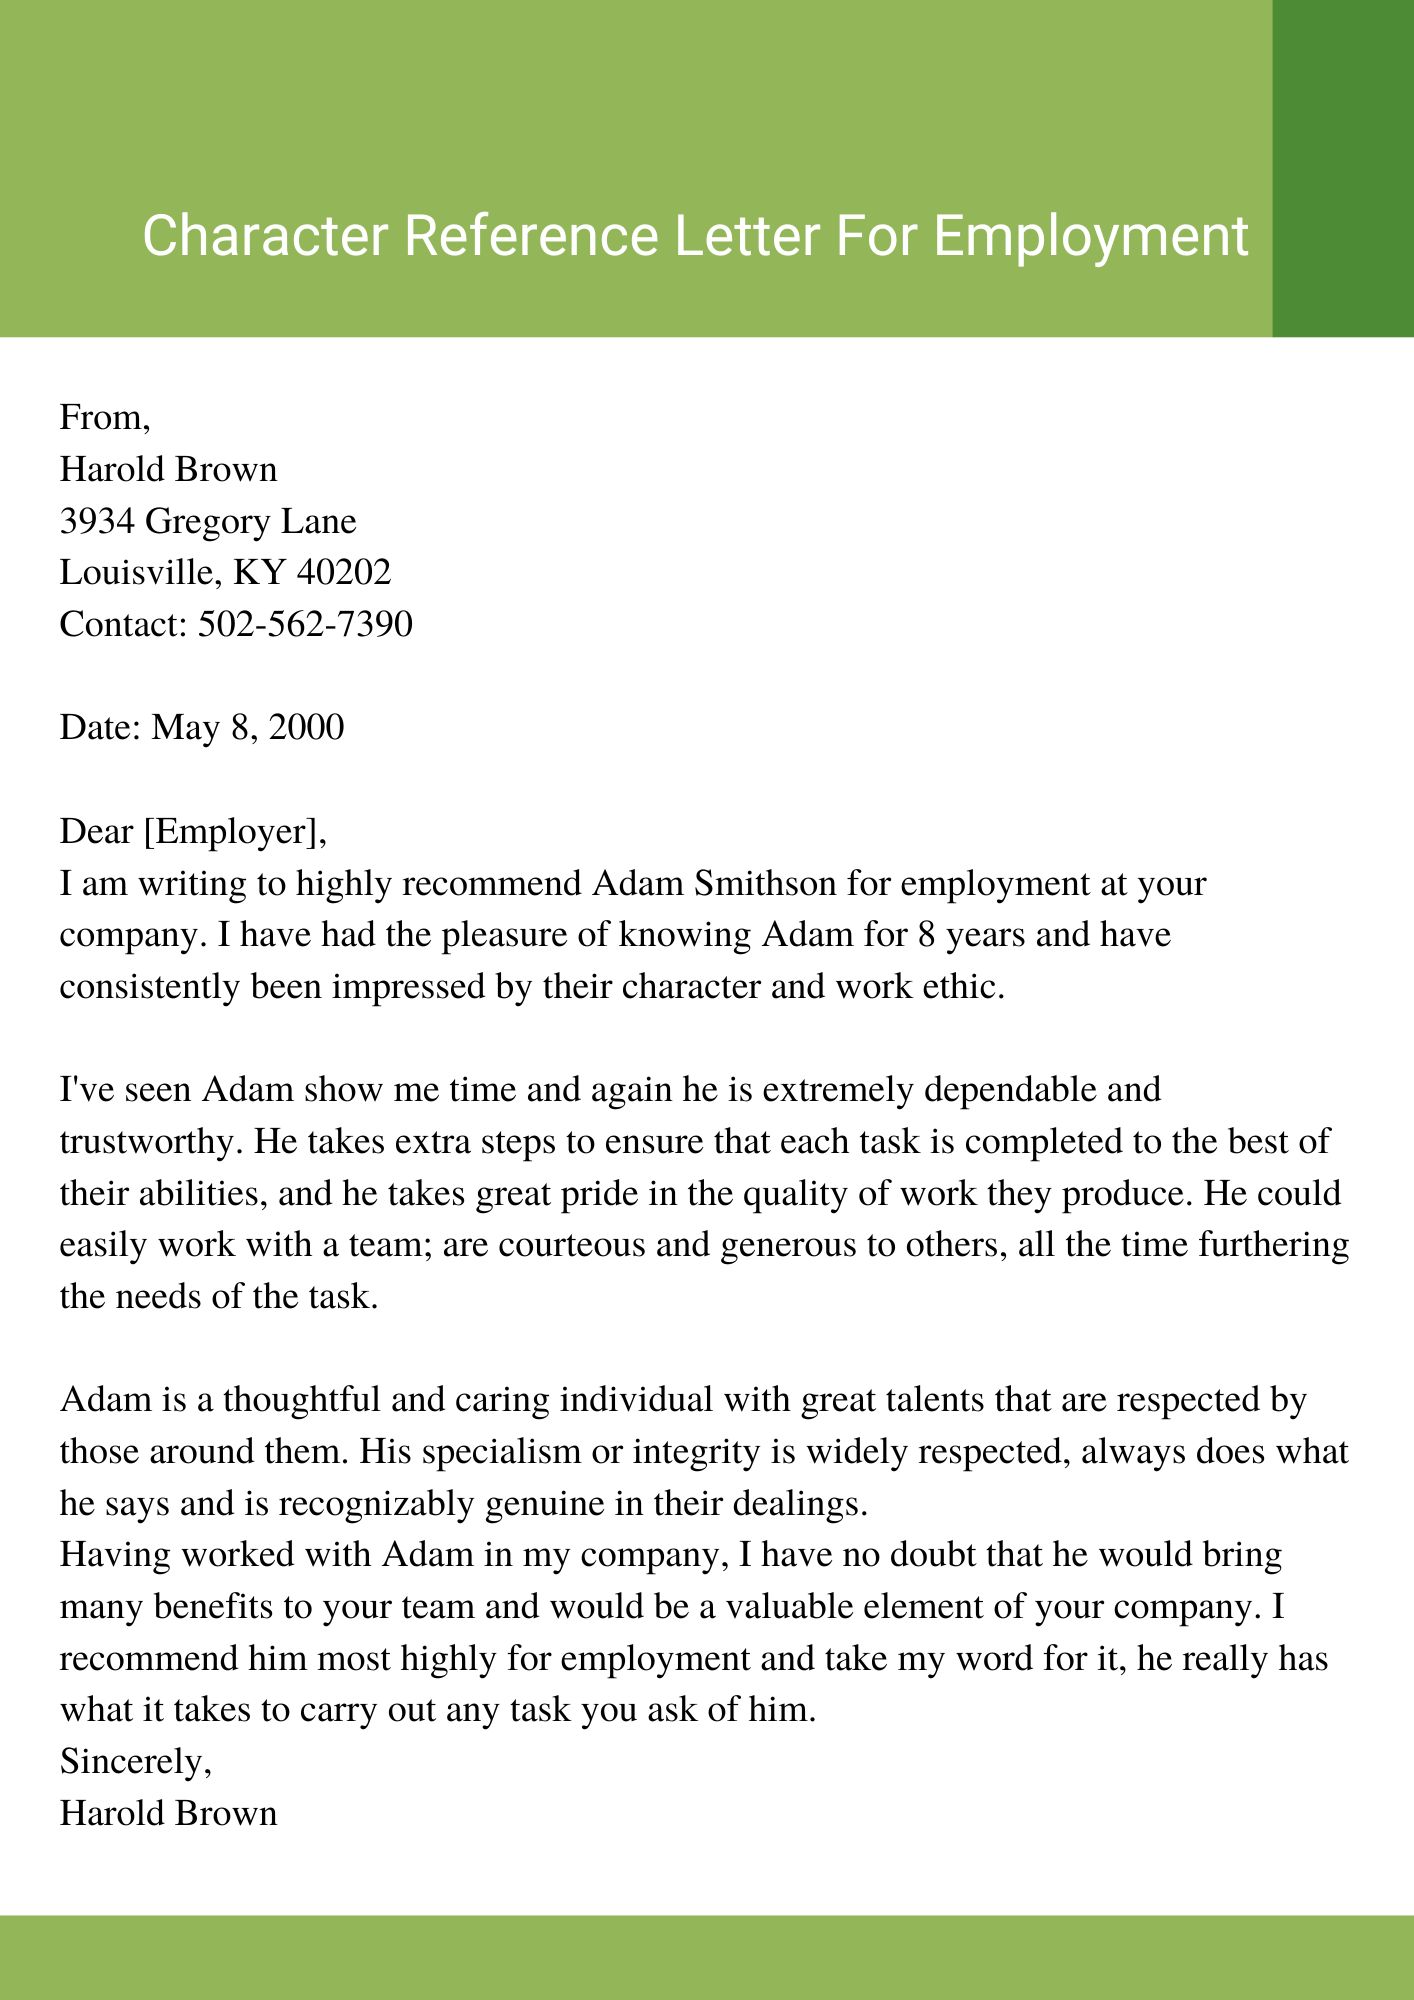 Employment Character Reference Letter Sample